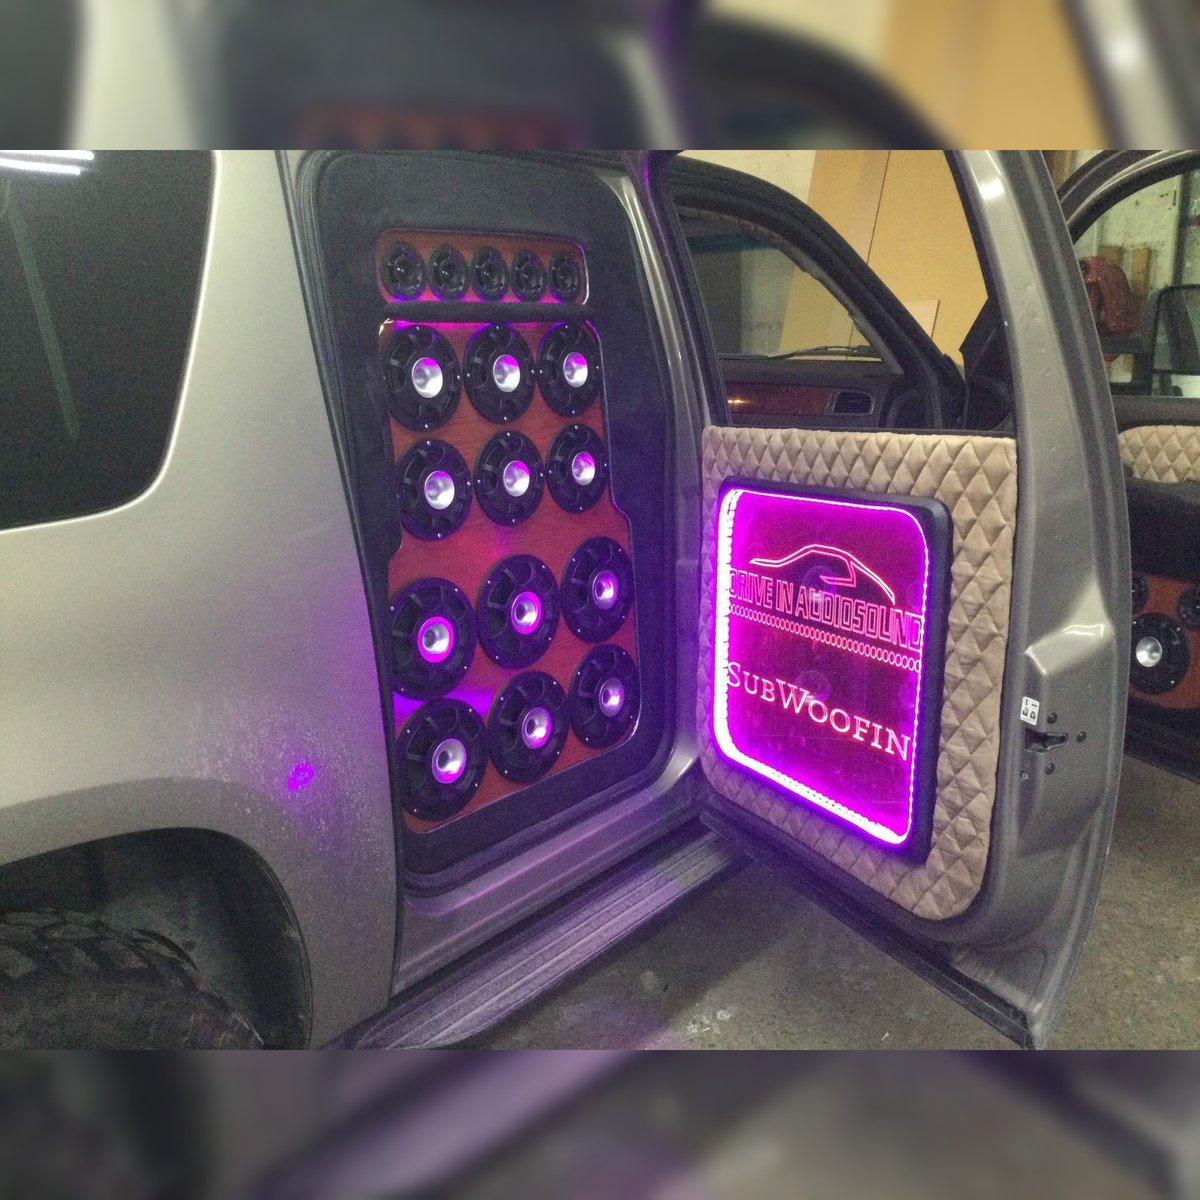 🤩🔊🎵👏👌Checkout this bangin 'Subwoofin' build from Bob Walkup! See more pictures here
bit.ly/3XHTRtN

🛒Shop #caraudio - bit.ly/3z0KDgO

#12voltmag #prvaudio #12volt #caraudioaddicts #subwoofers